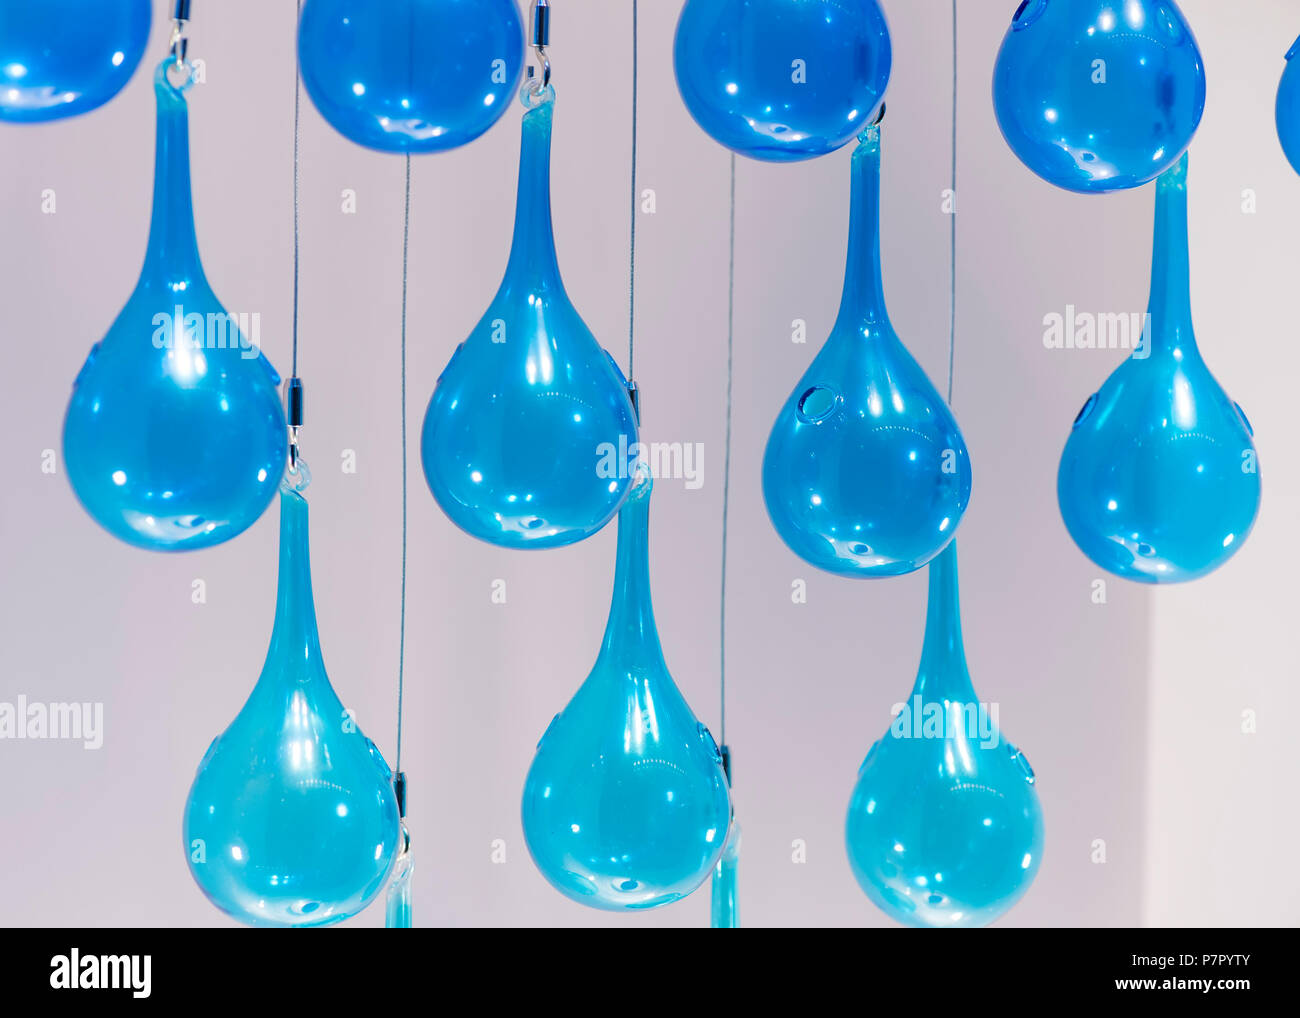 Blue Glass Tied Rope Hanging On Ceiling Stock Photo 211331819 Alamy